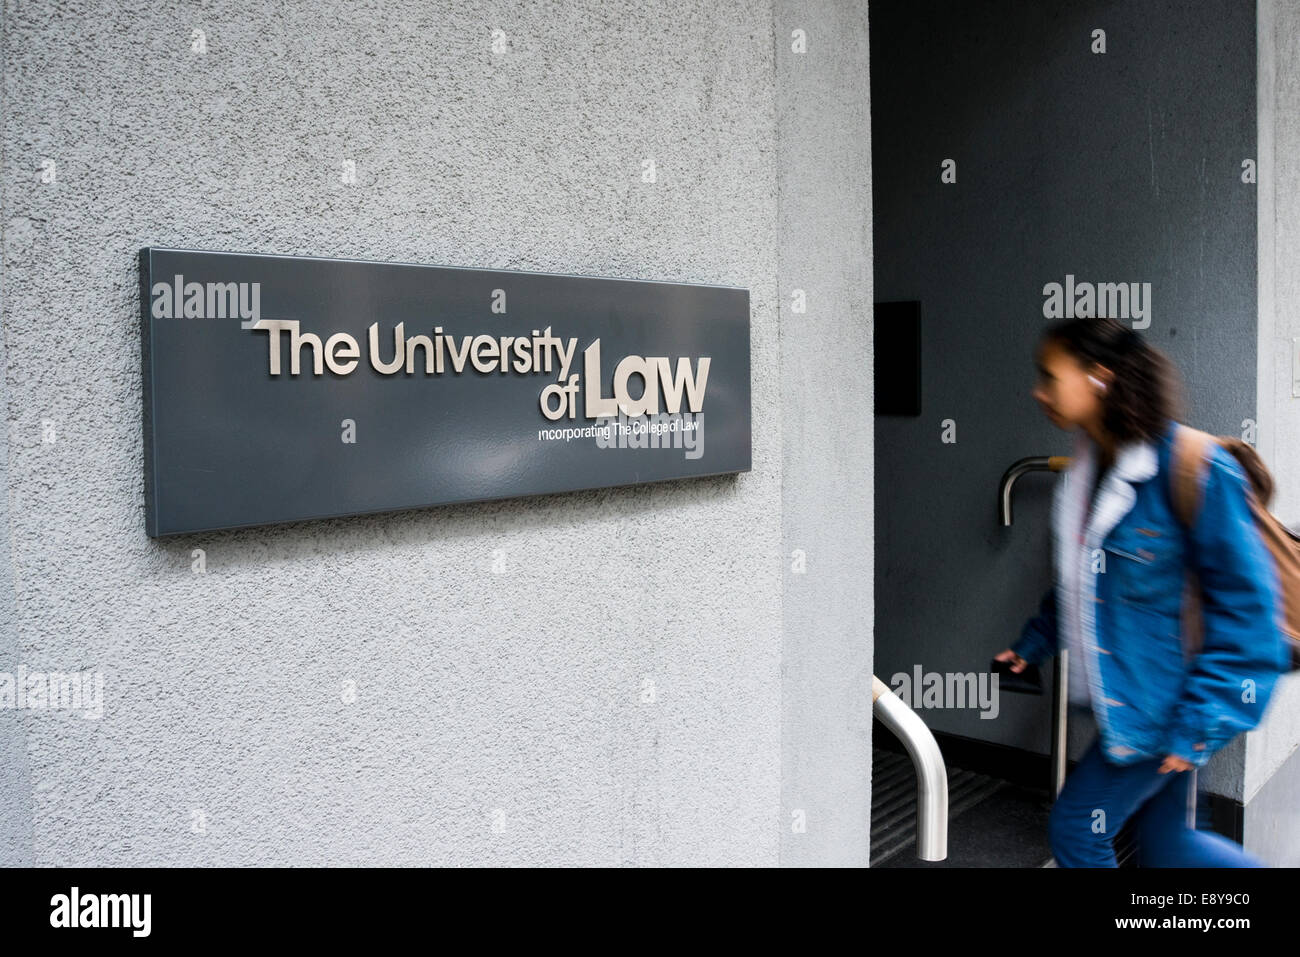 The University of Law is a private university with its own degree awarding powers under English law, London, UK Stock Photo